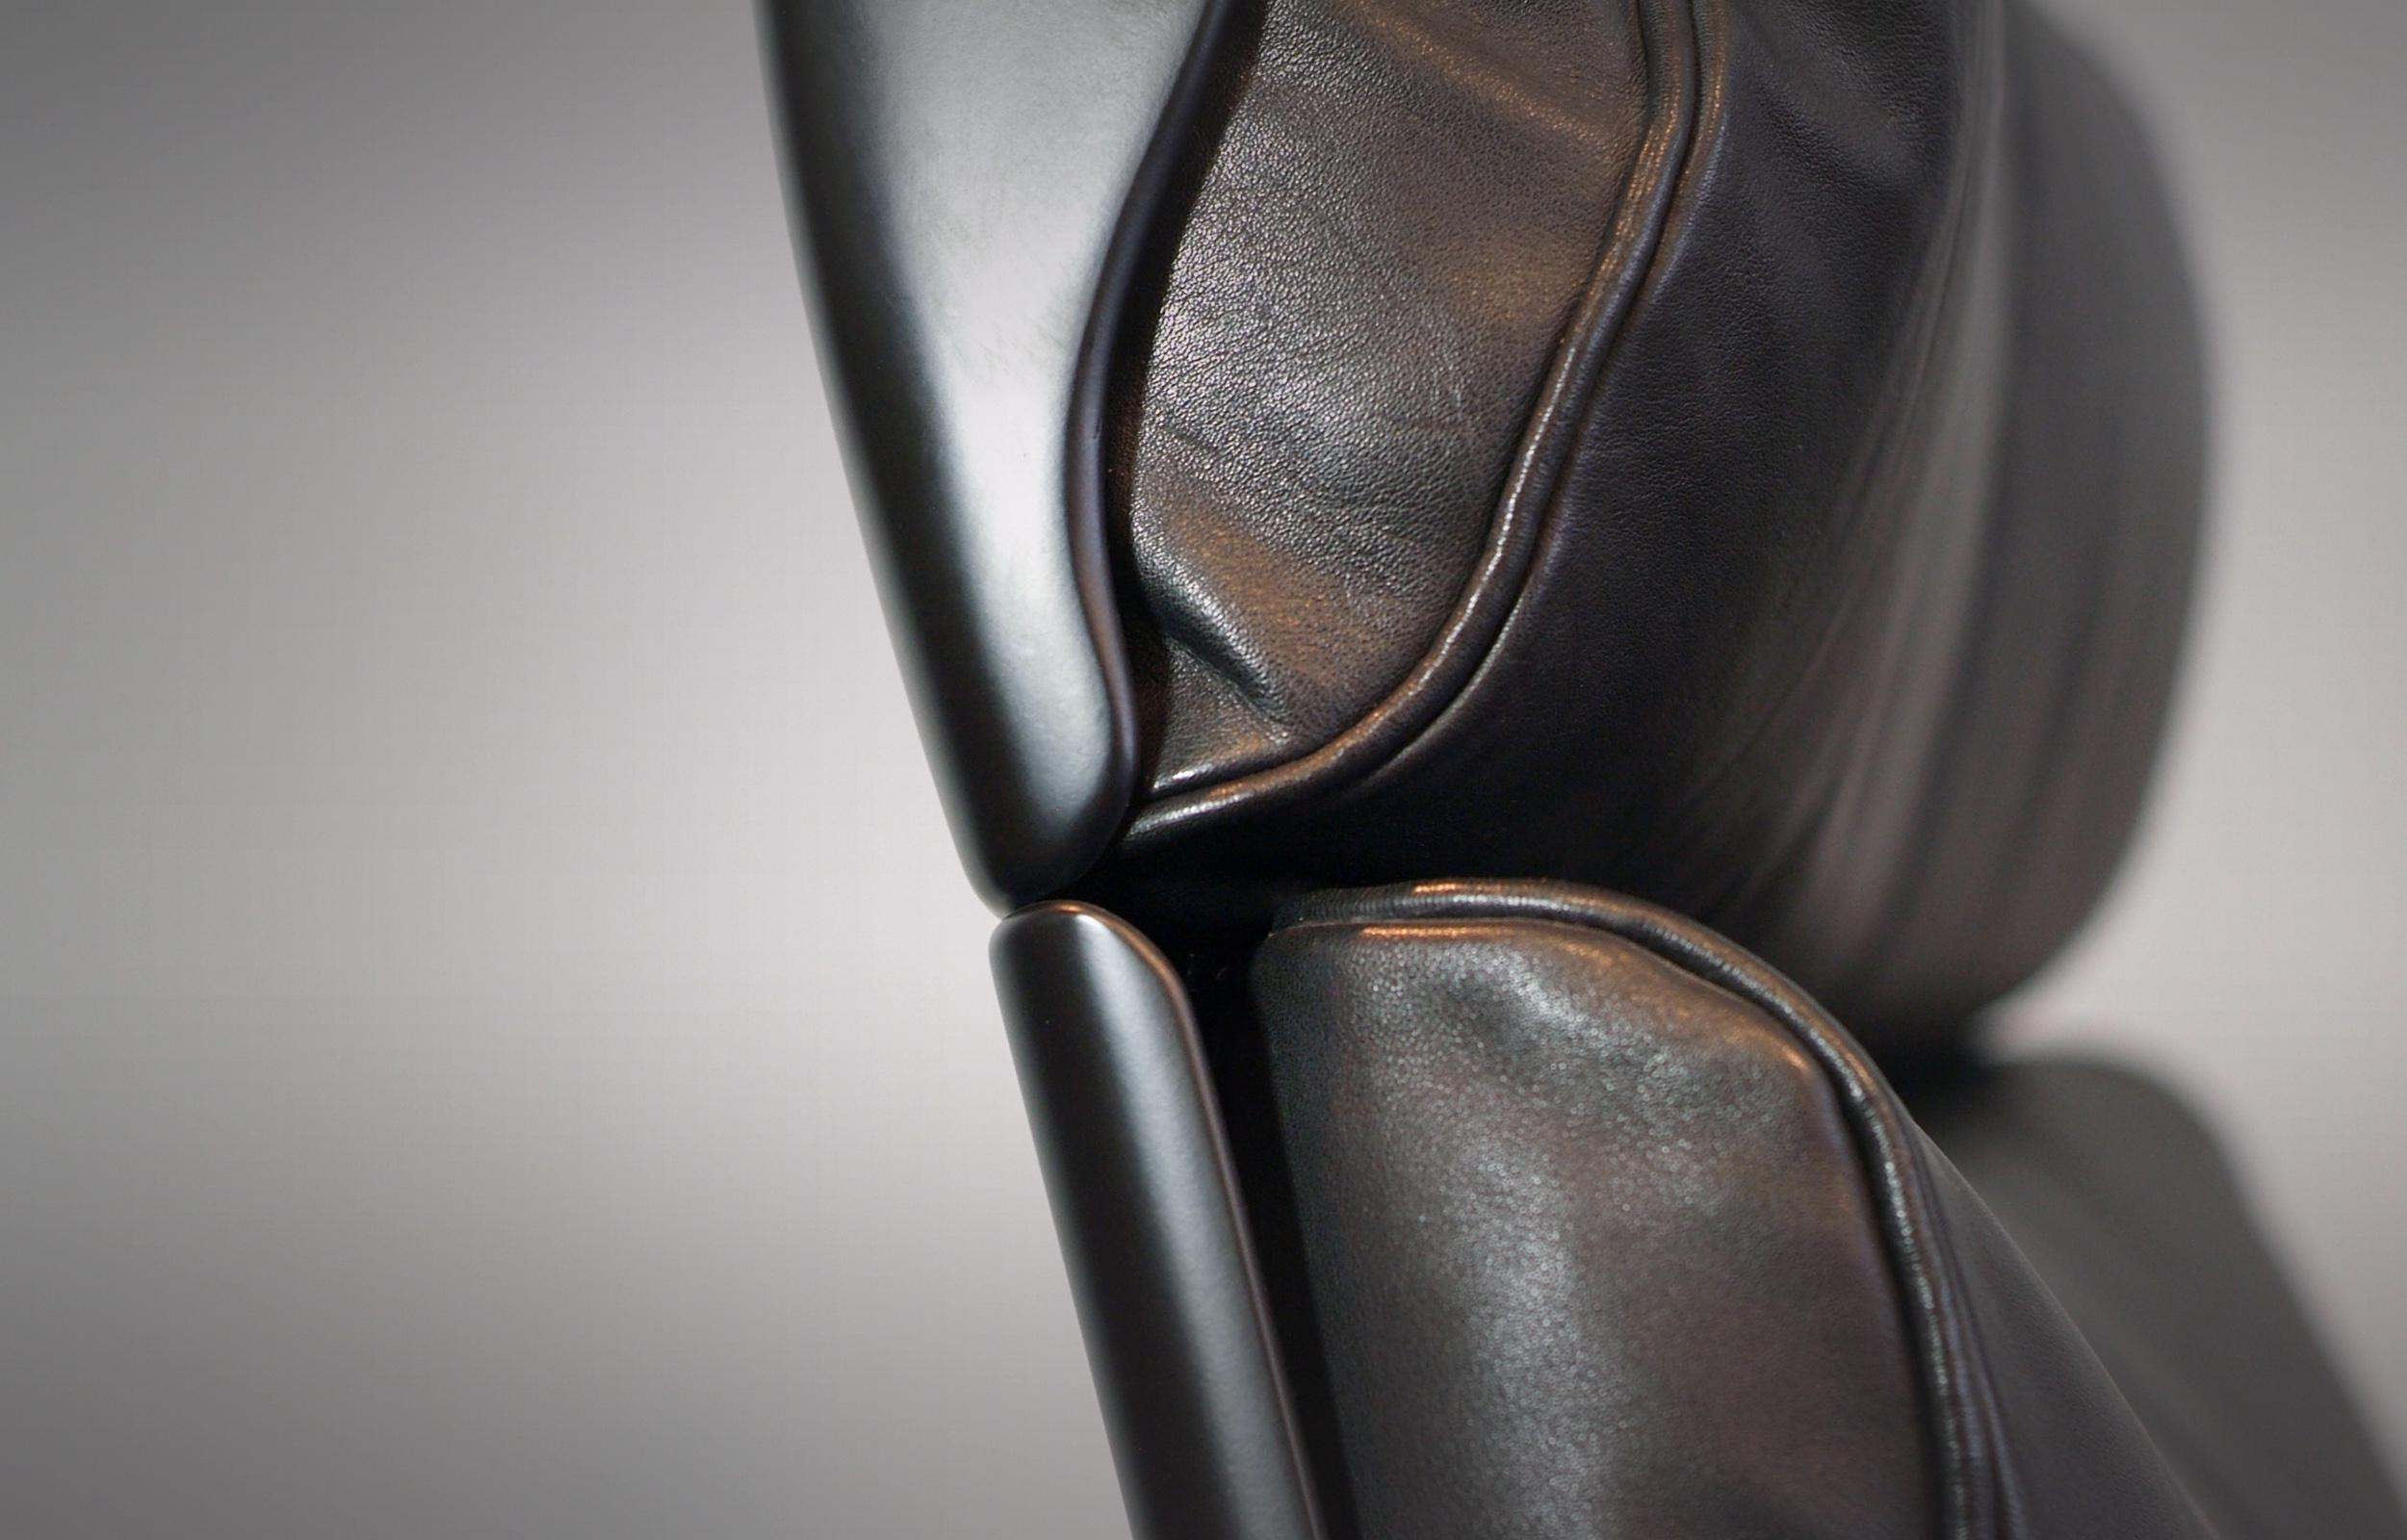 German Highback Leather Lounge Chair Mod. 620 by Dieter Rams for Vitsoe Black Leather